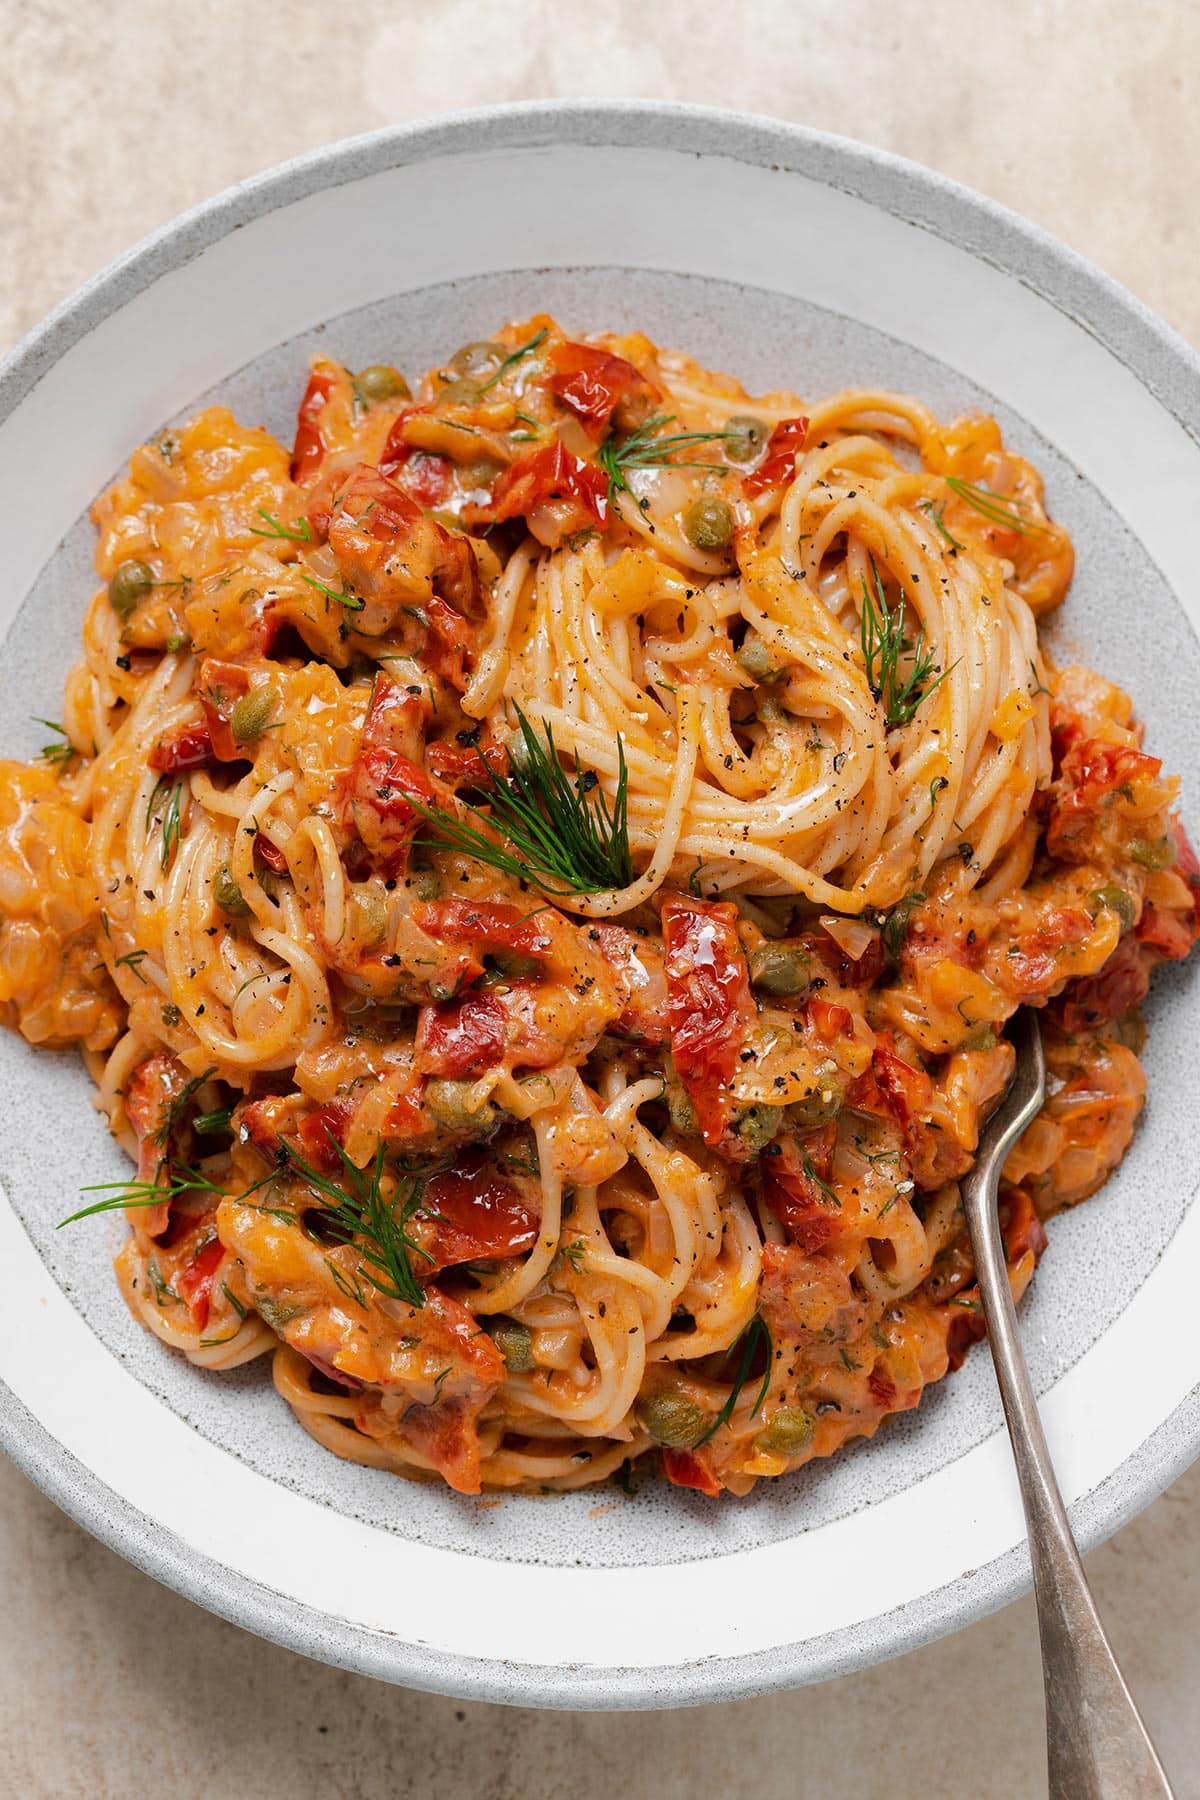 A close up photo of Creamy Sun-dried Tomato Pasta with Capers and Dill shown in a grey bowl with a silver fork in the bowl on the right side.